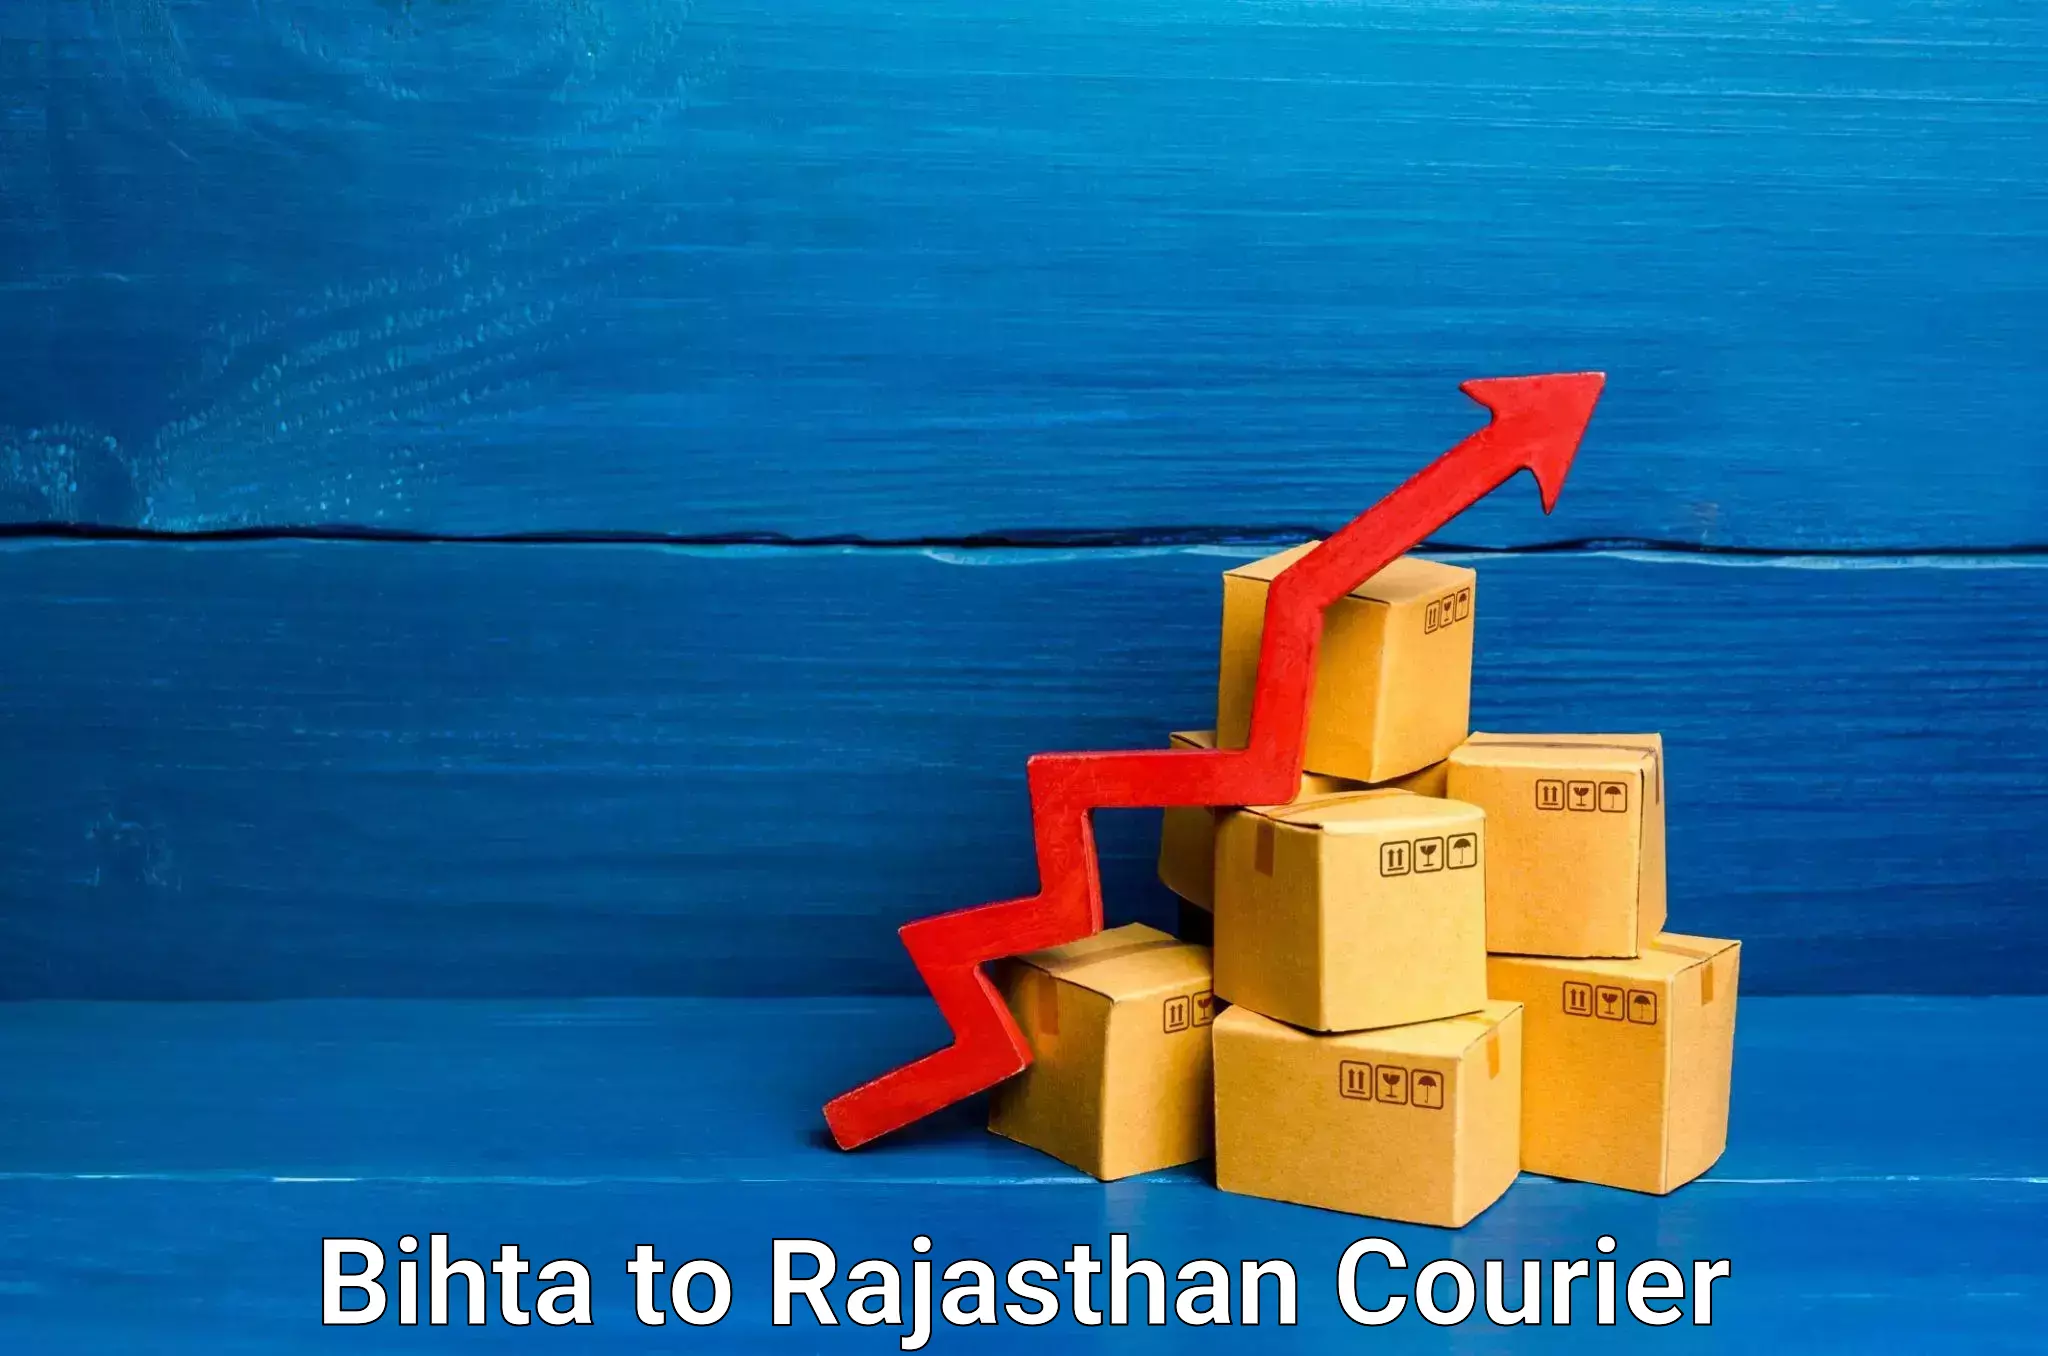 Trusted relocation experts Bihta to Rajasthan